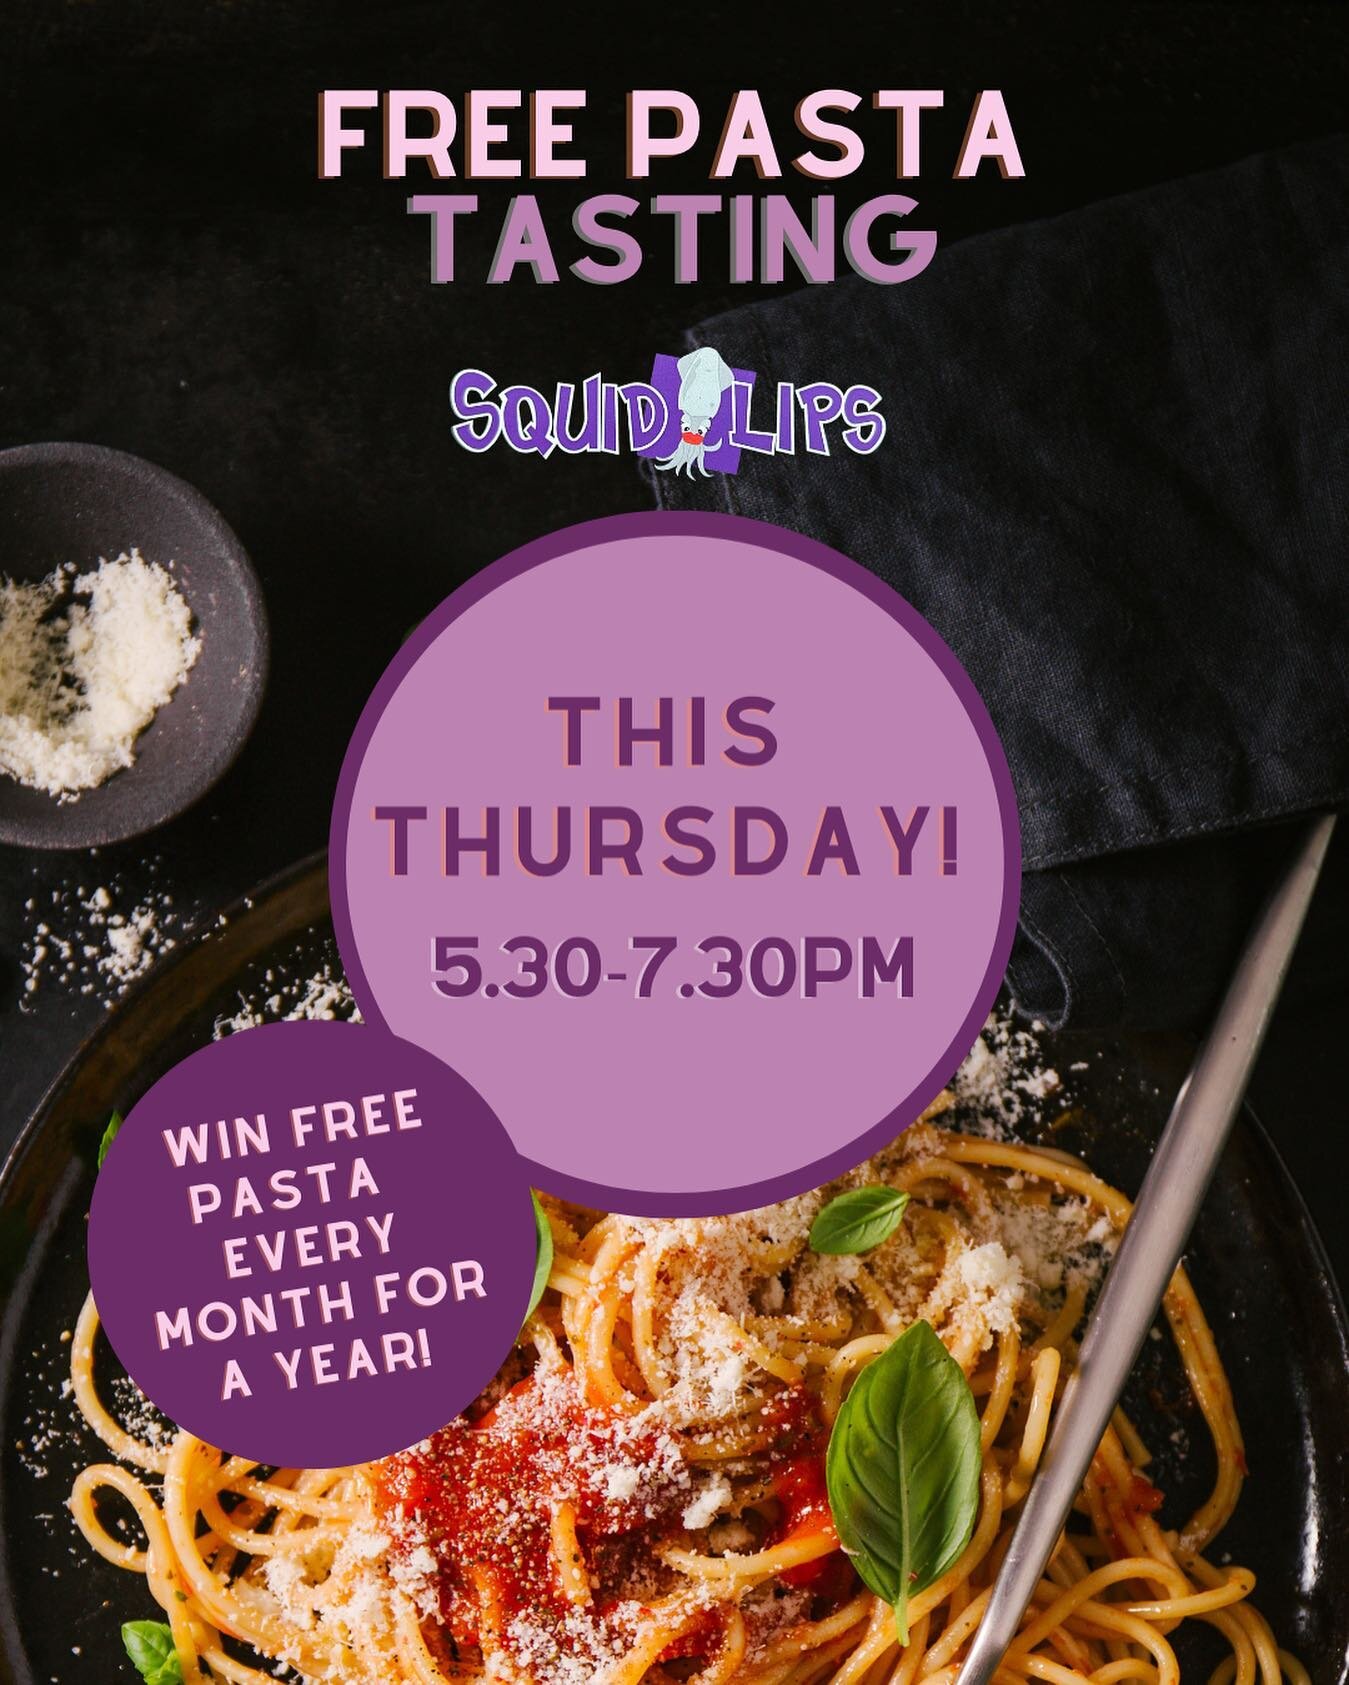 @squidlipsduns now has a new Mediterranean twist! Enjoy the taste of the Mediterranean with the addition of a new pasta menu.

Join @squidlipsduns this Thursday (tomorrow!) from 5.30-7.30 to sample their new pasta menu for FREE! 

Also, go into the d